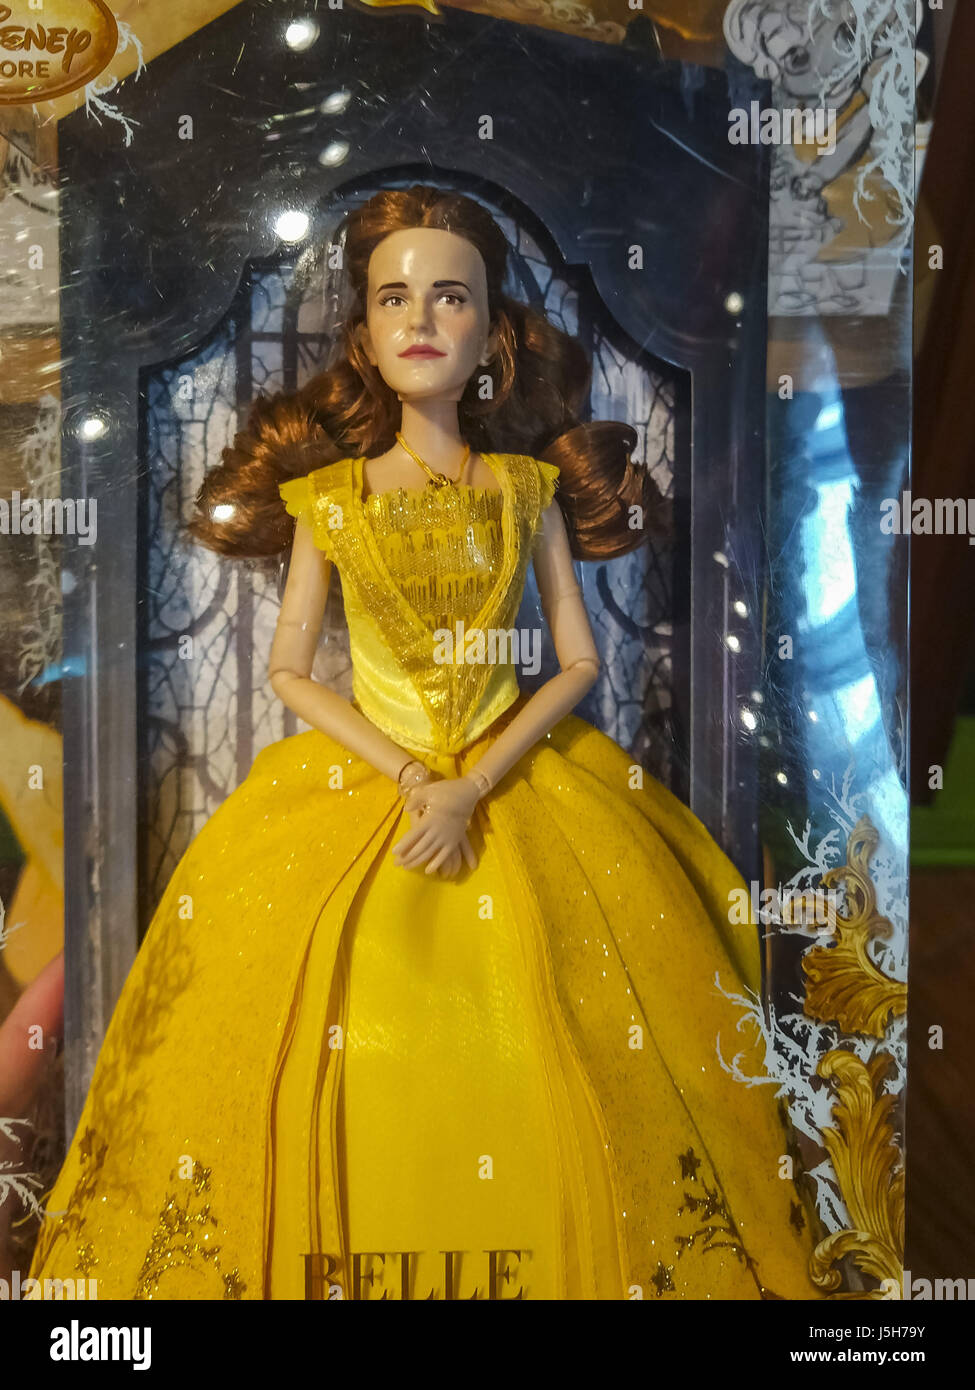 May 16, 2017 - Shanghai, Shanghai, China - Shanghai, CHINA-May 16 2017:  (EDITORIAL USE ONLY. CHINA OUT) People find that the Barbie doll of  Princess Belle of Emma Watson version looks like